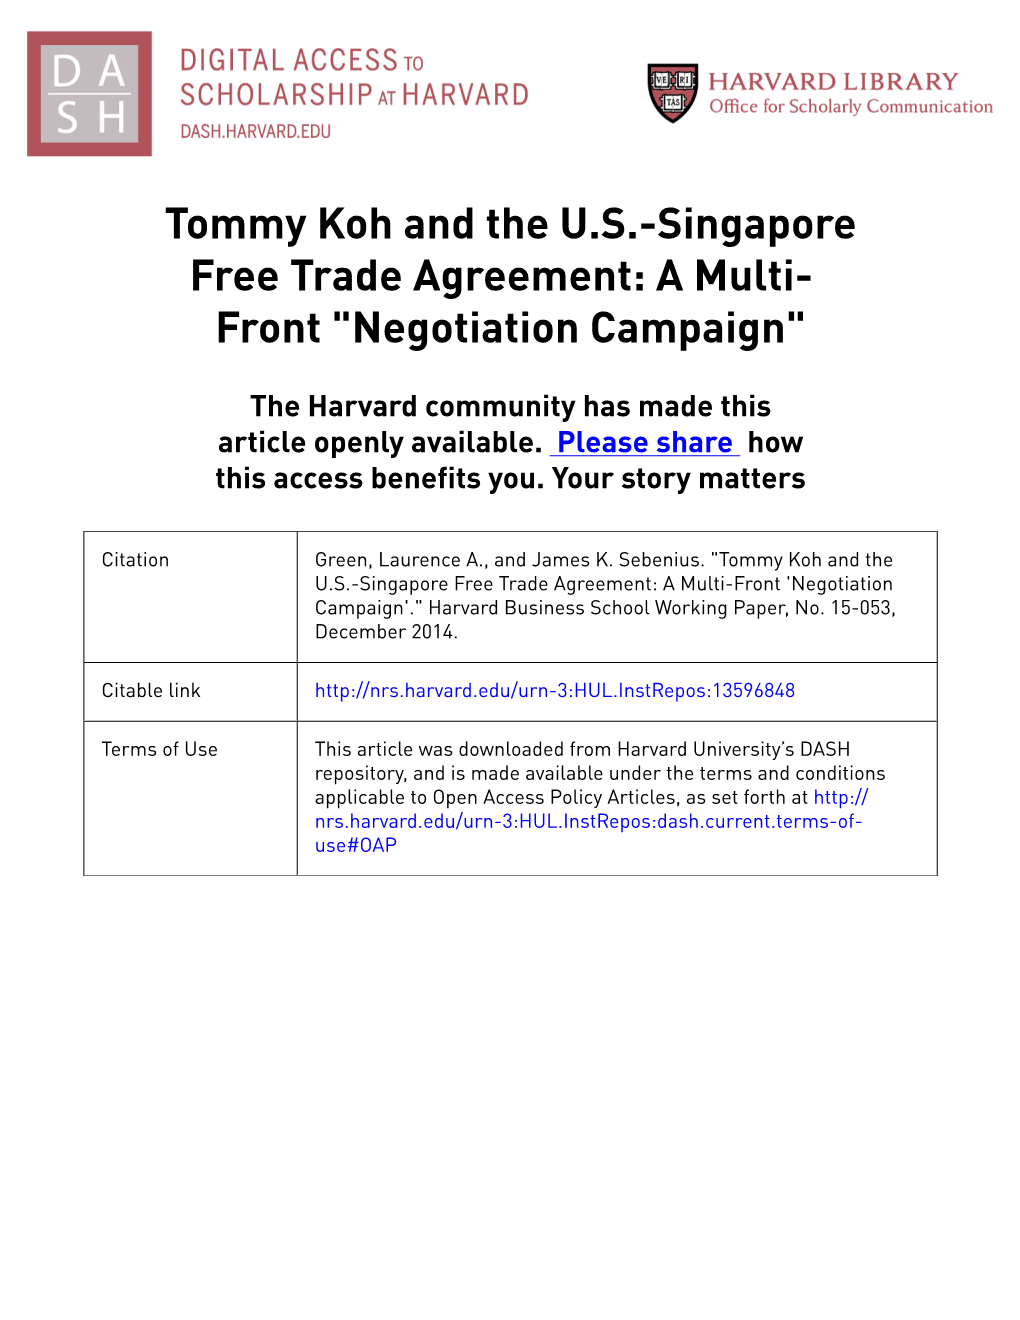 Tommy Koh and the US-Singapore Free Trade